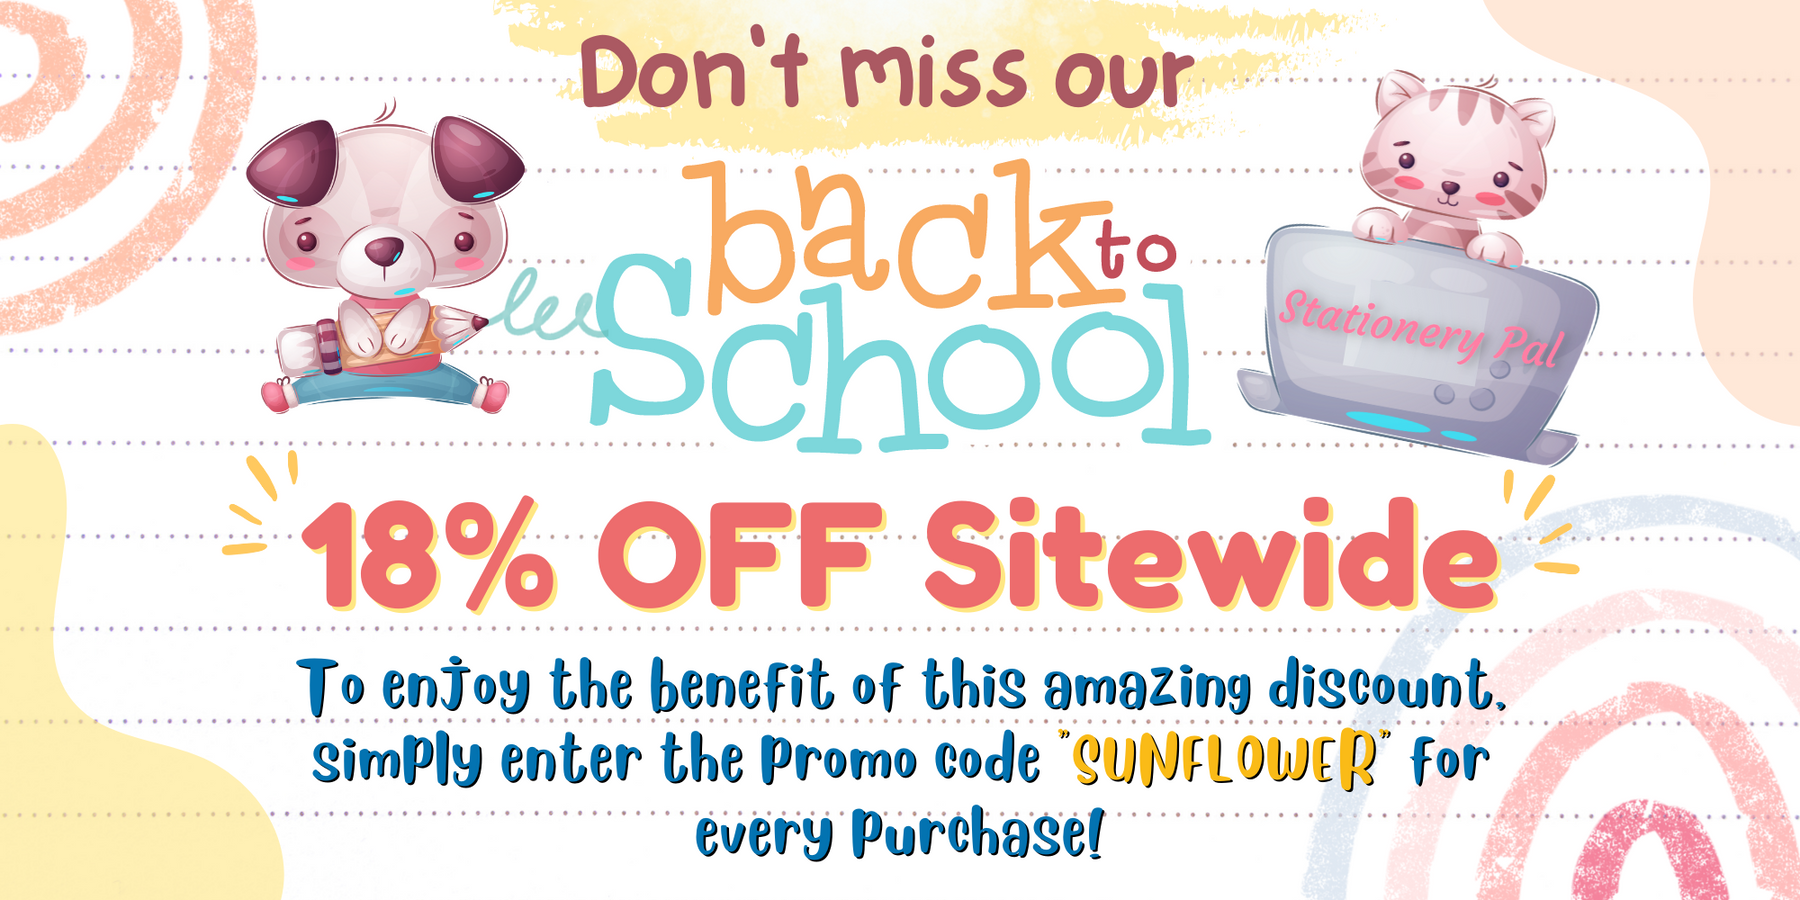 Back to School 18% Off Sitewide